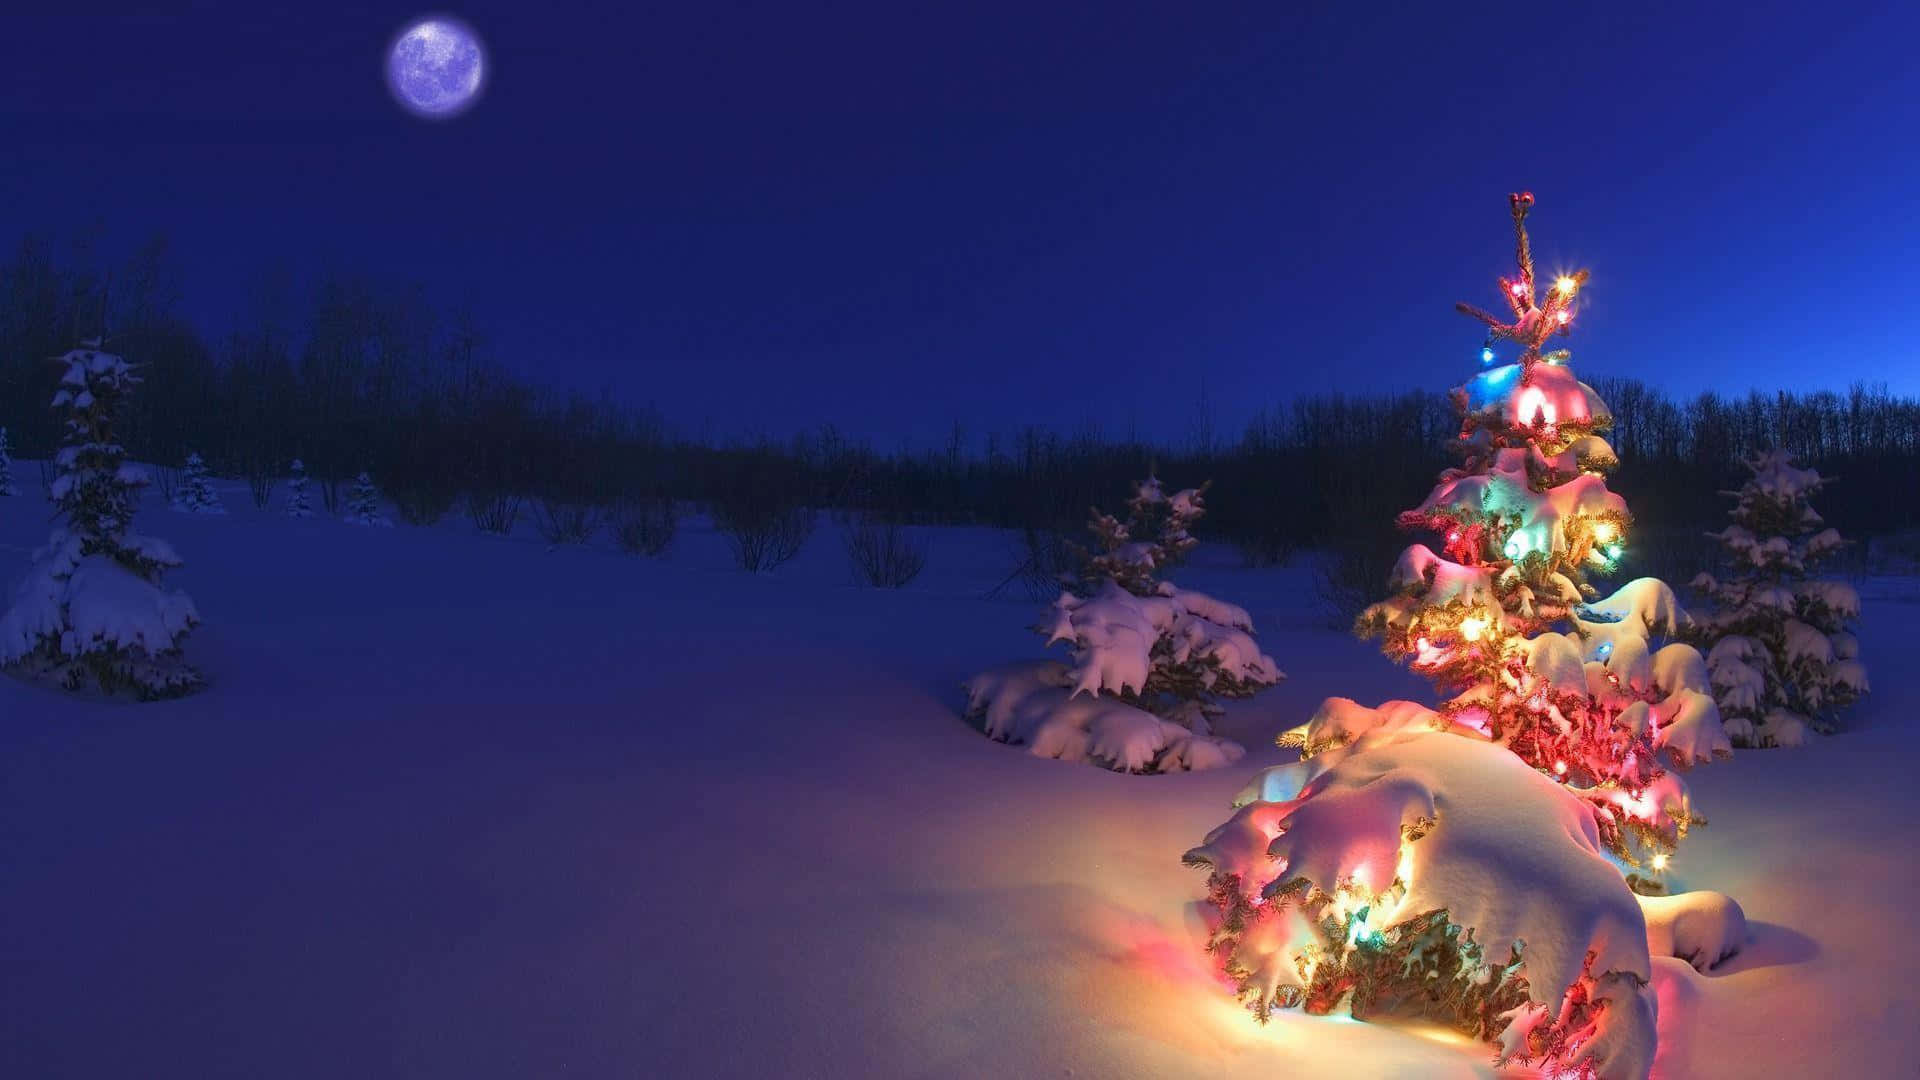 Get Ready for the Holidays with This Magical Xmas Scene